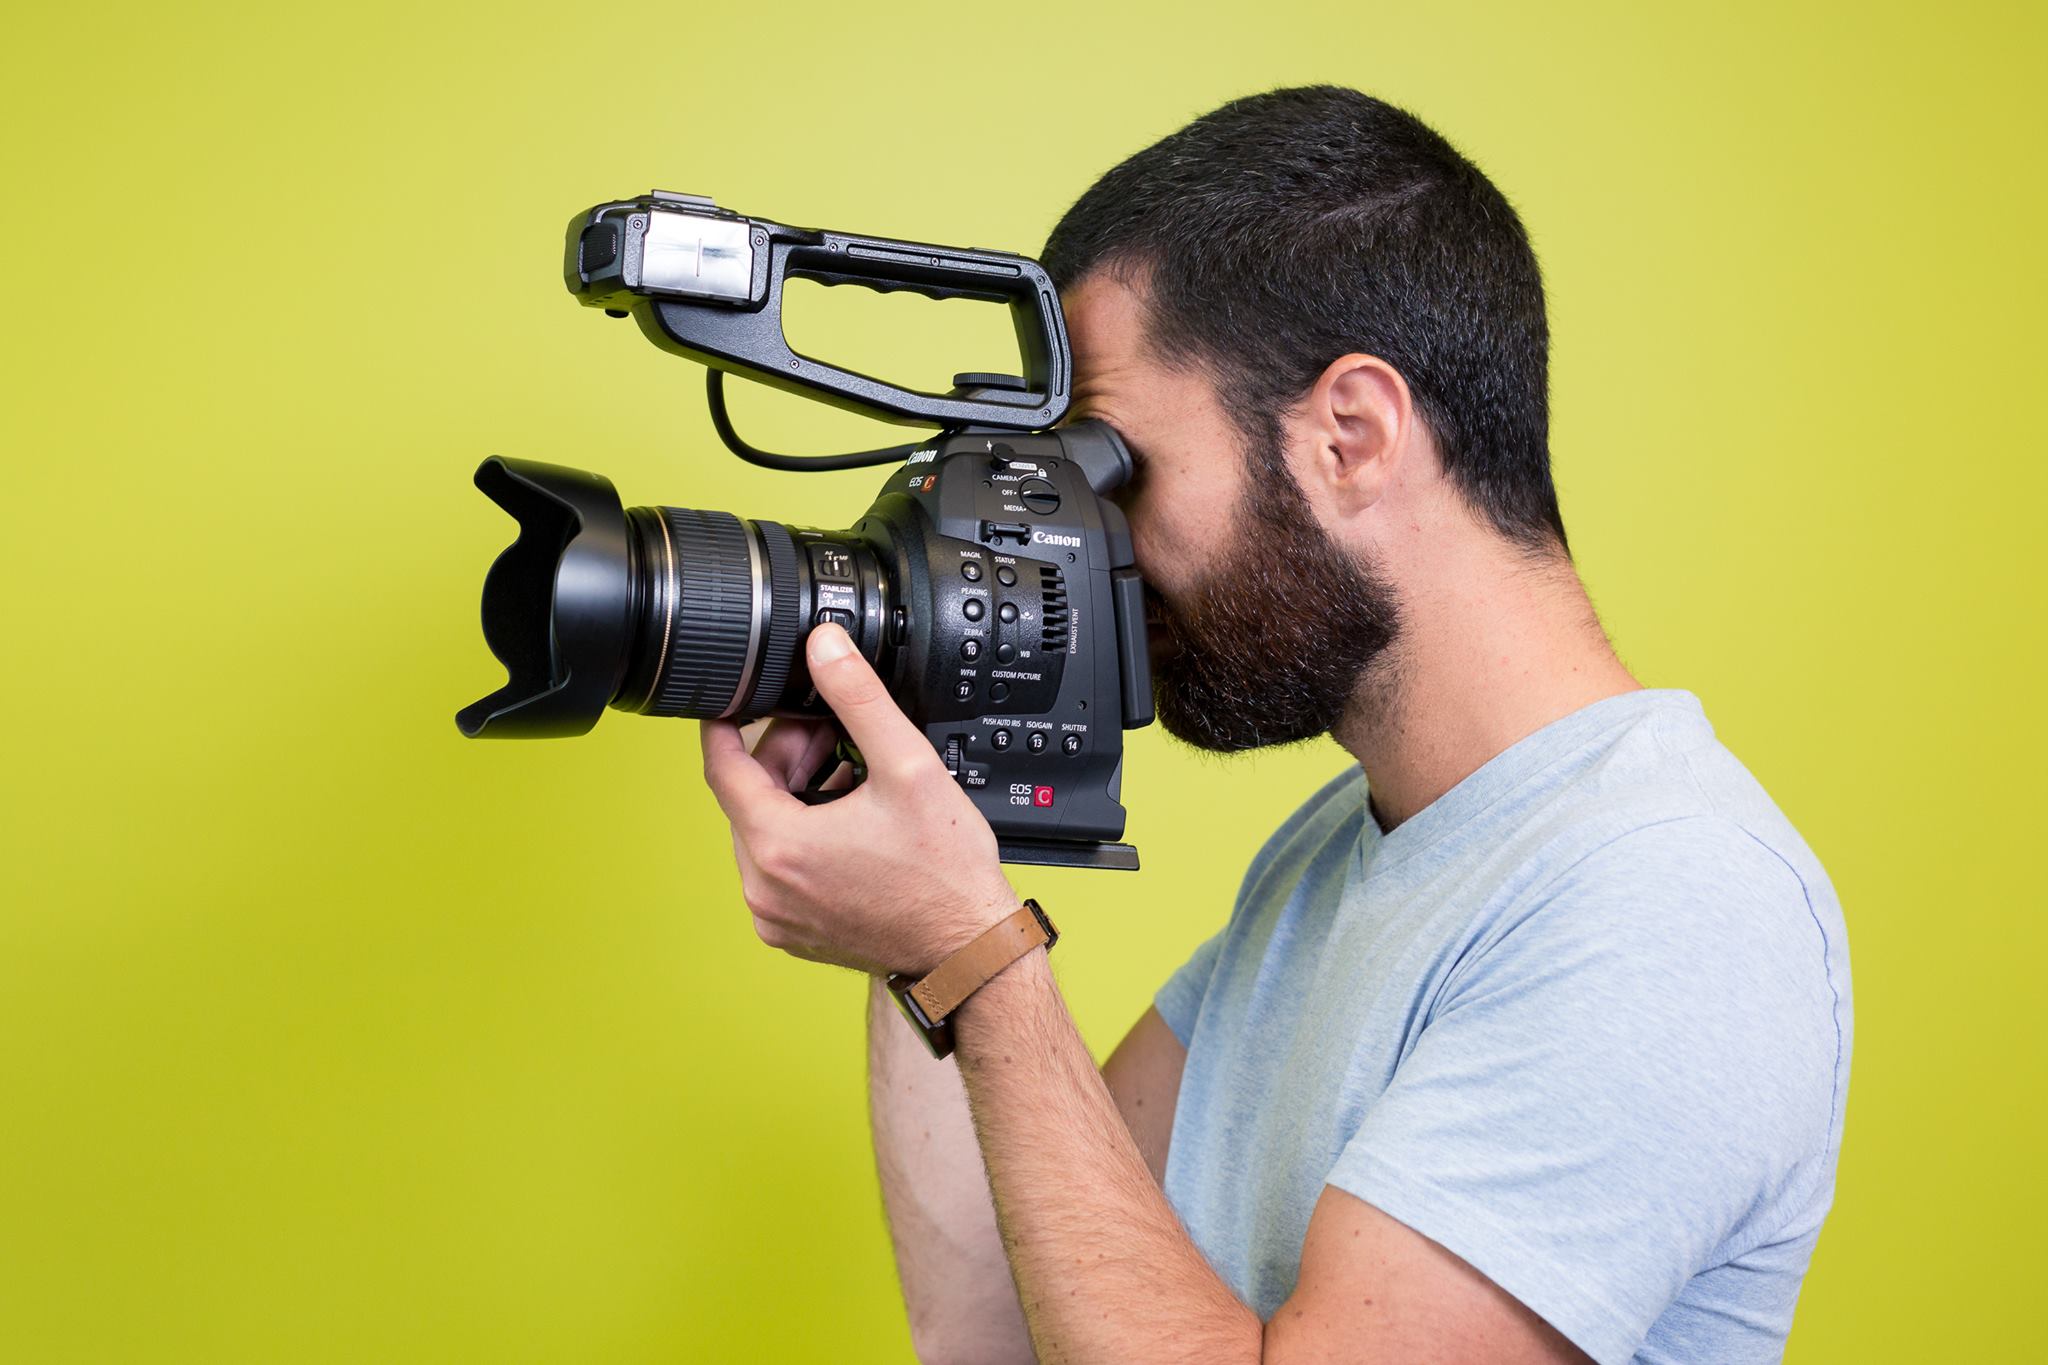 man holding camera in front of green background